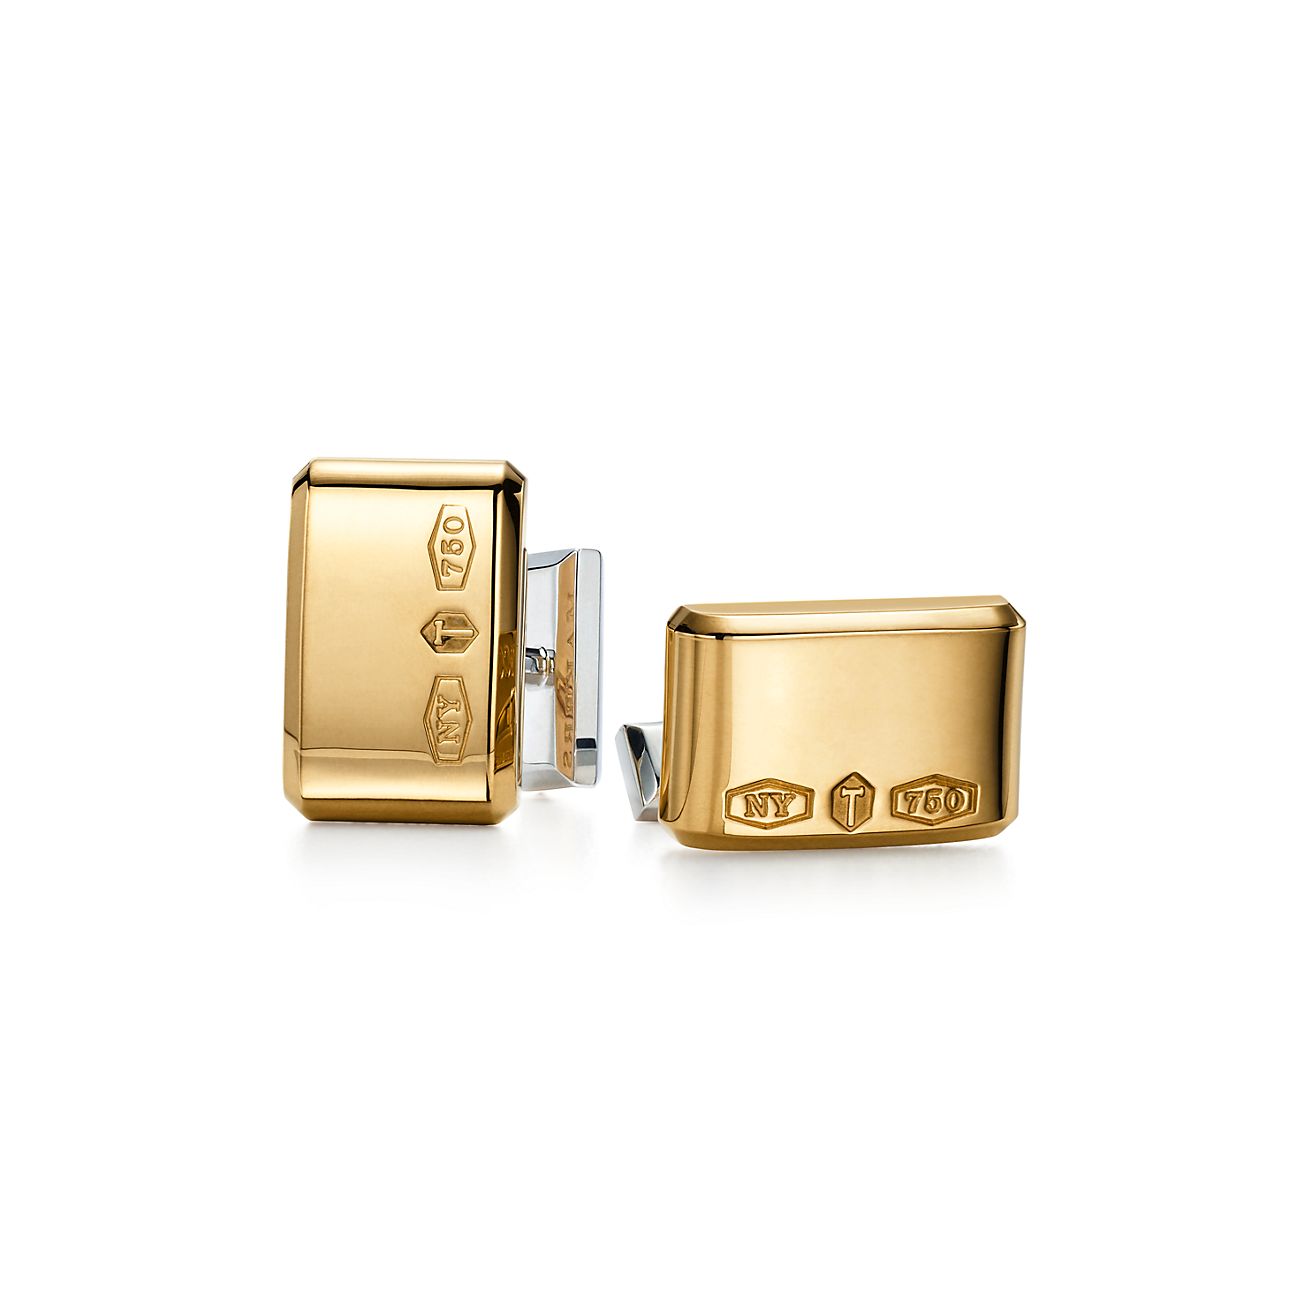 Makers rectangle cufflinks in 18k gold 